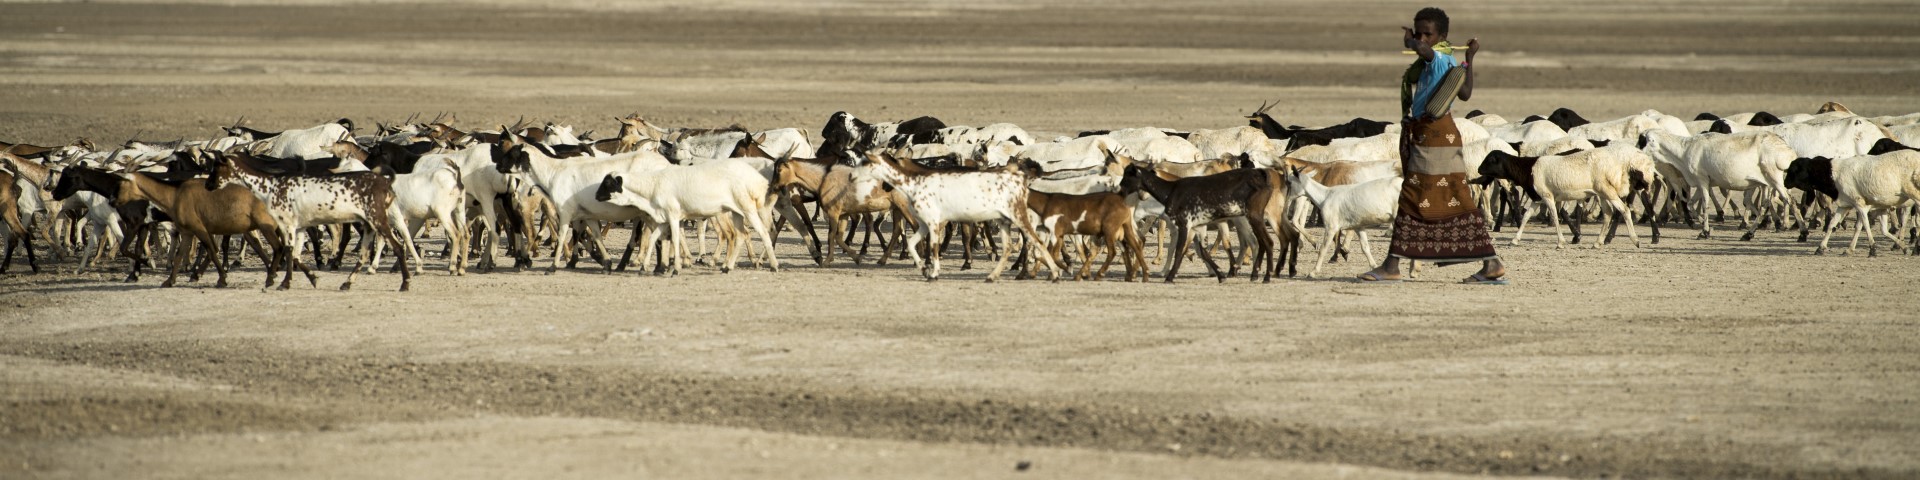 A shepherd walks with a herd of goats through a dry landscape.